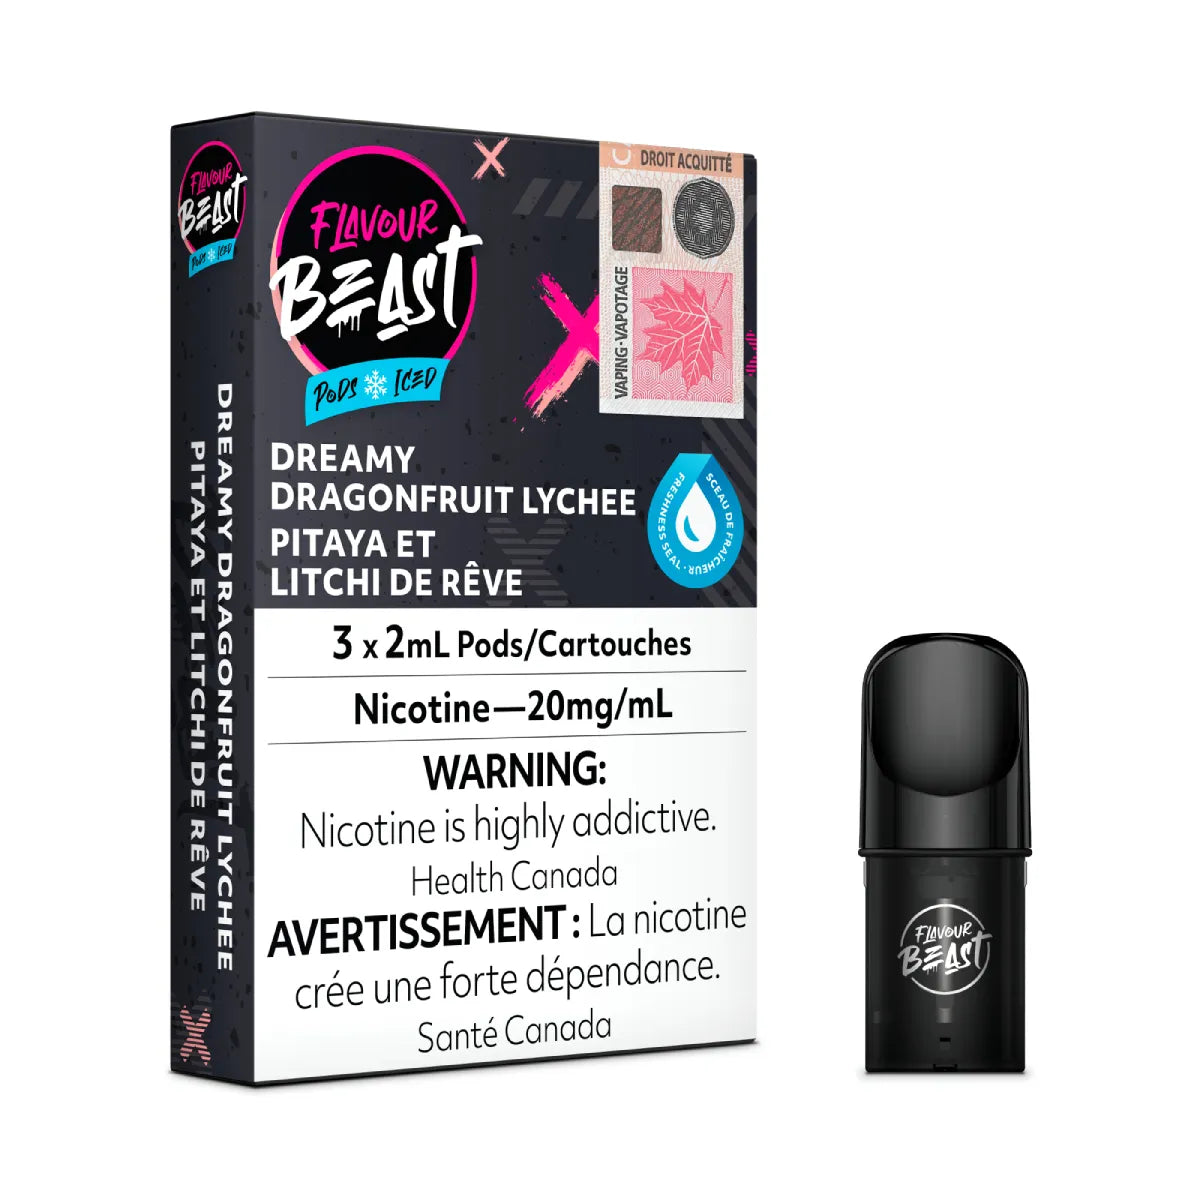 Dreamy Dragonfruit Lychee - Flavour Beast Pod Pack - 20mg - EXCISED